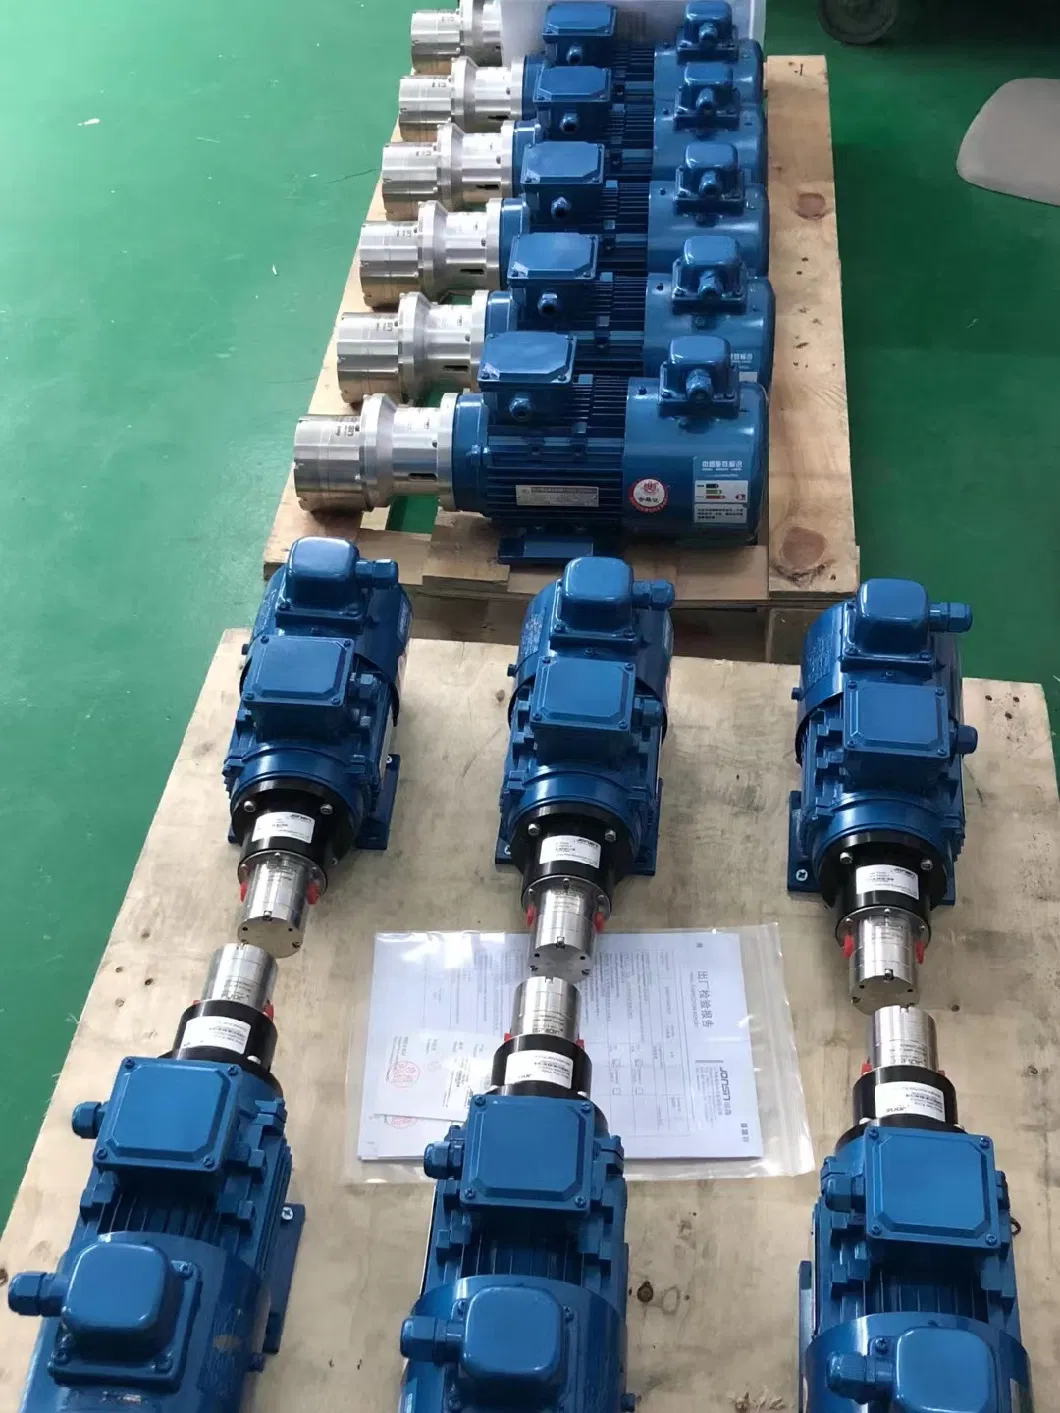 0.18kw 3 Phases IEC Motor Drive Magnetic Gear Pump Ss6316L